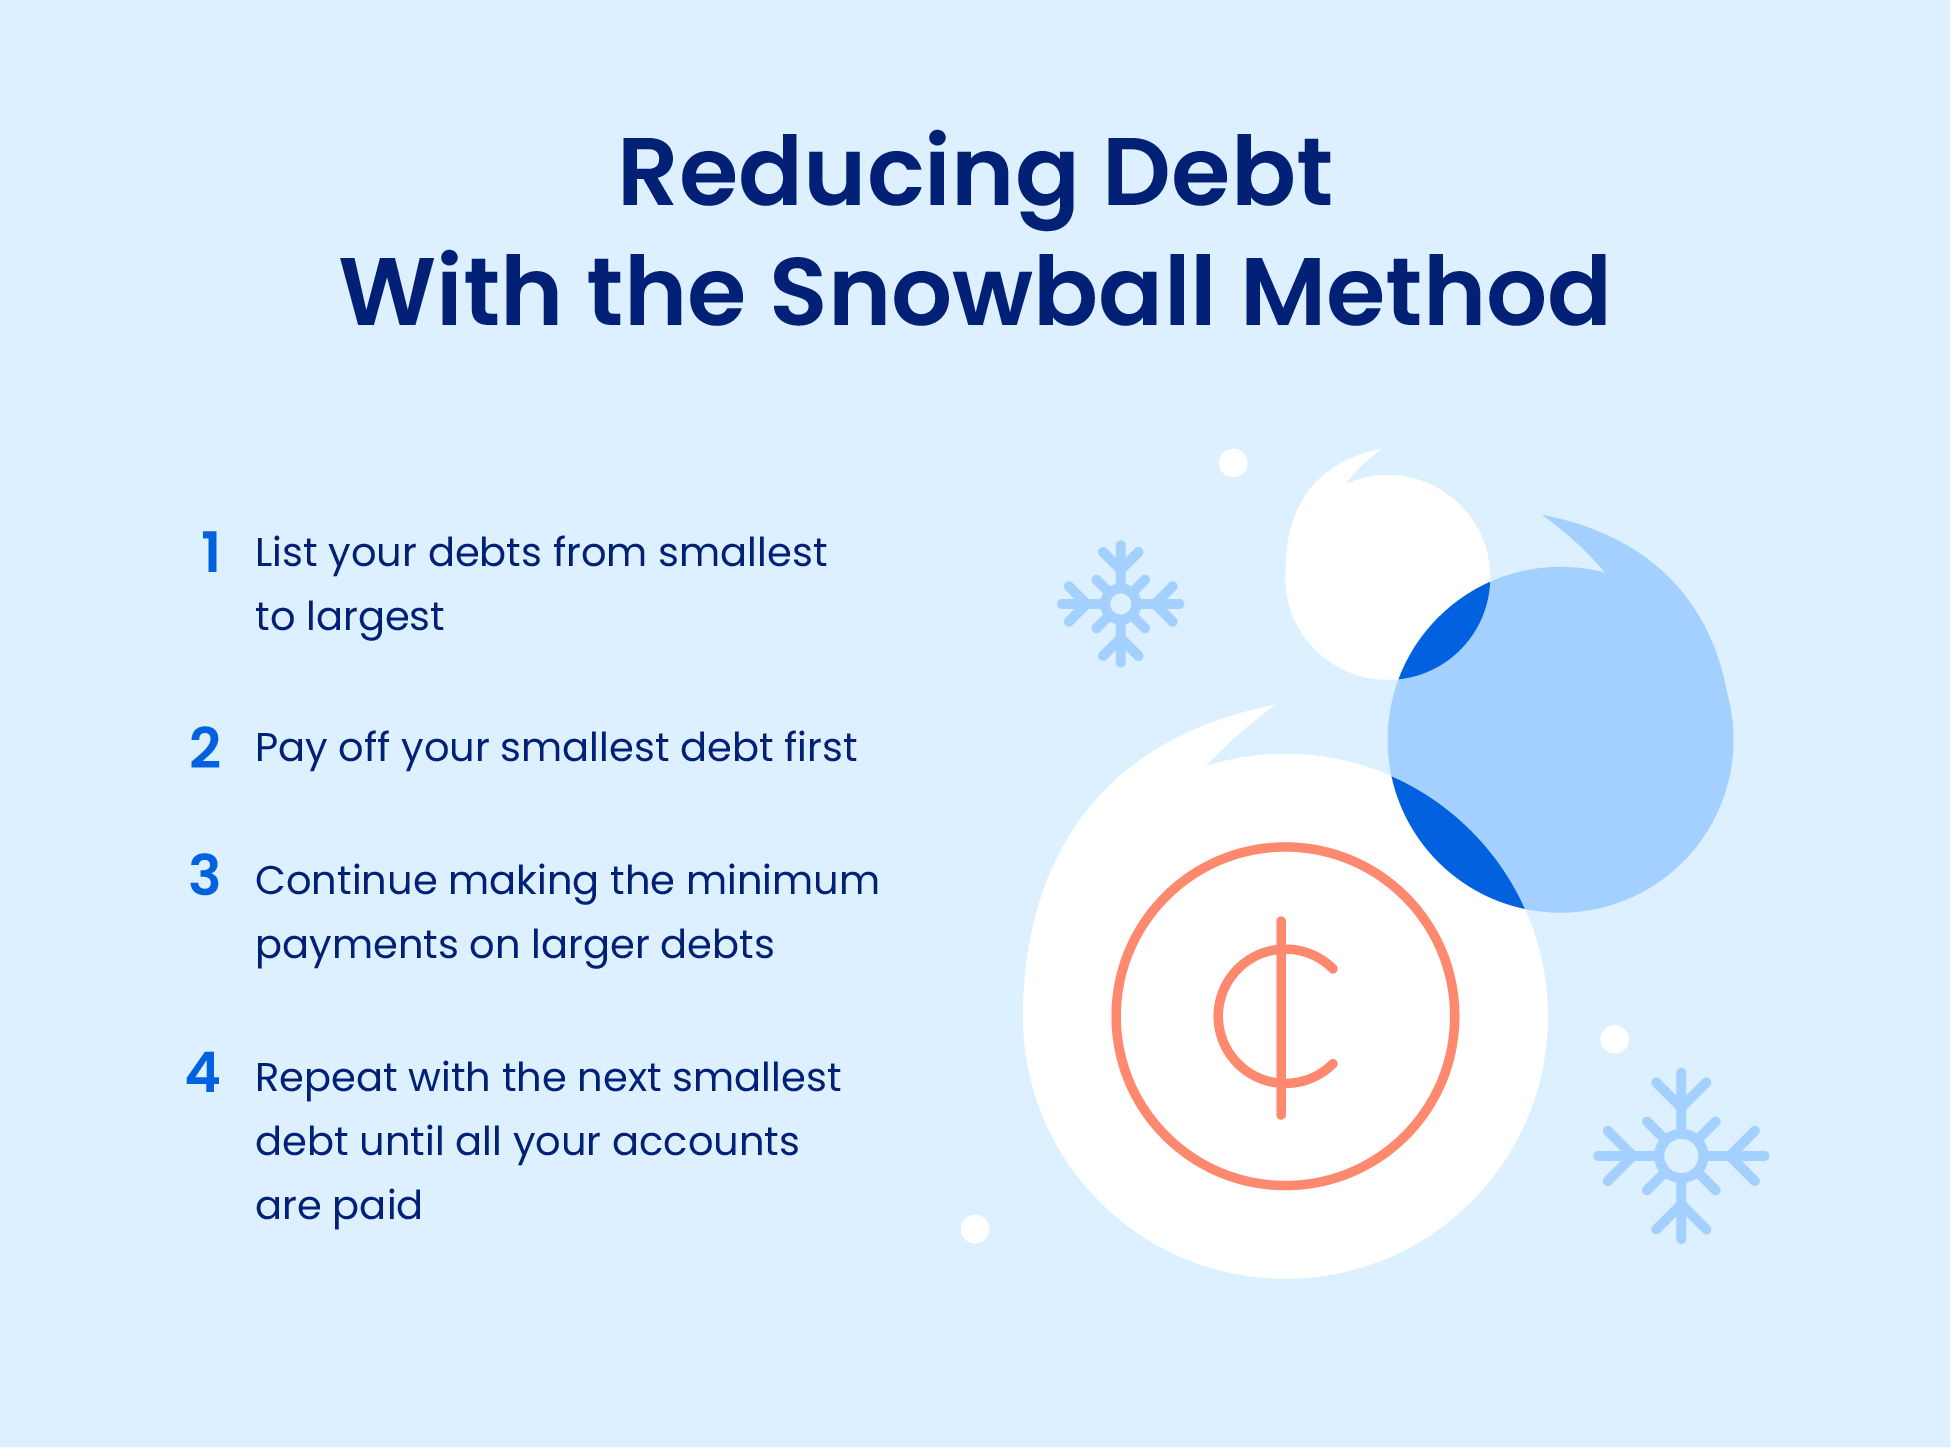 Reducing debt and improving credit score with the snowball method